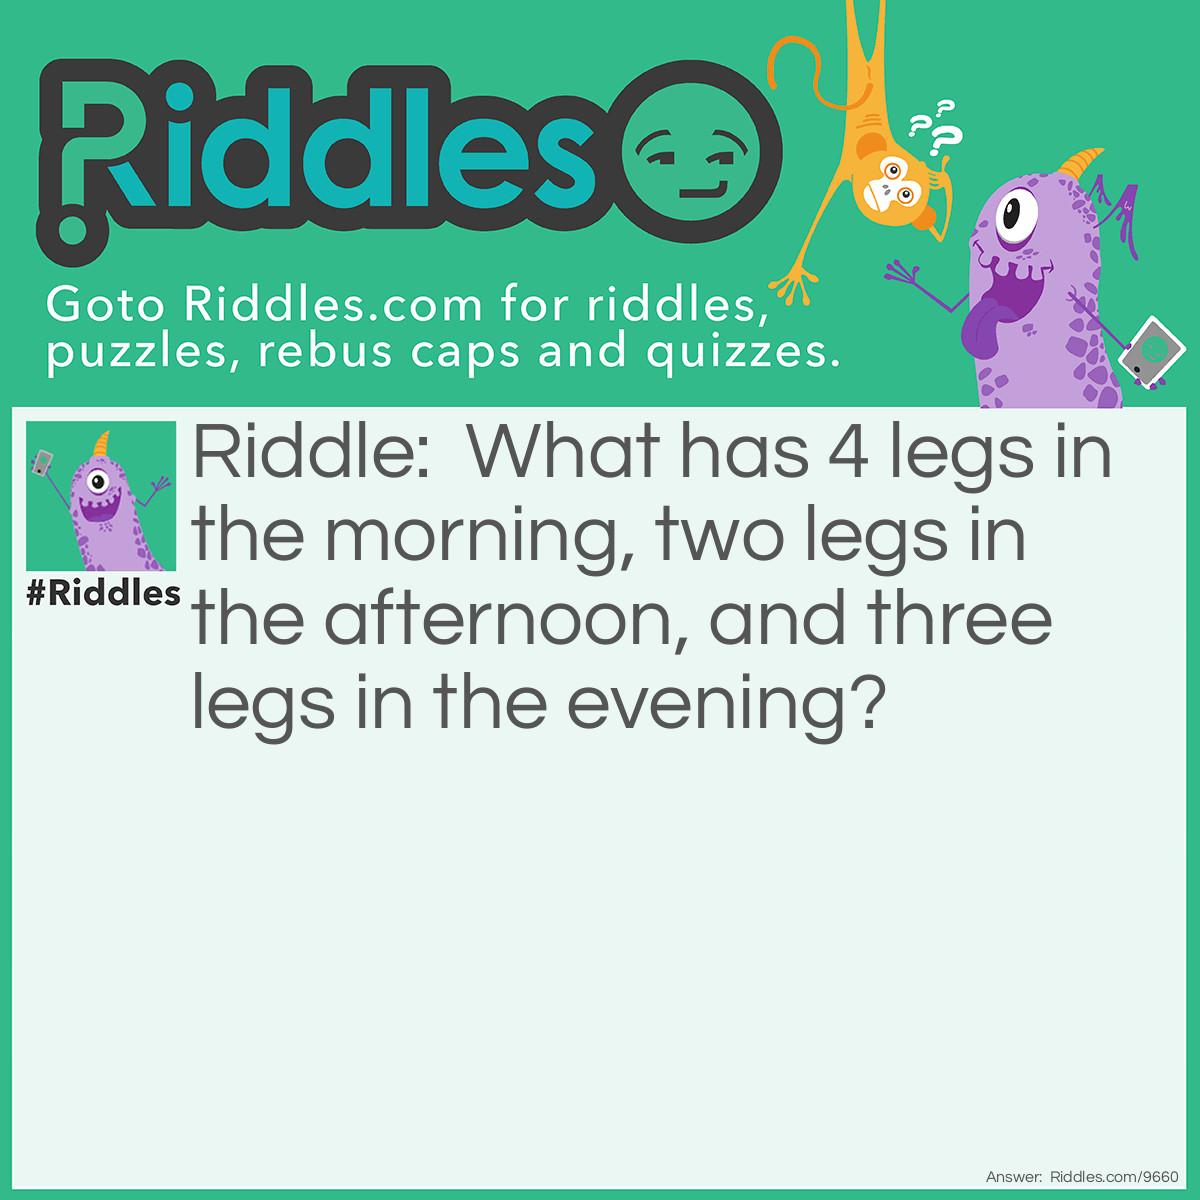 Riddle: What has 4 legs in the morning, two legs in the afternoon, and three legs in the evening? Answer: A person.